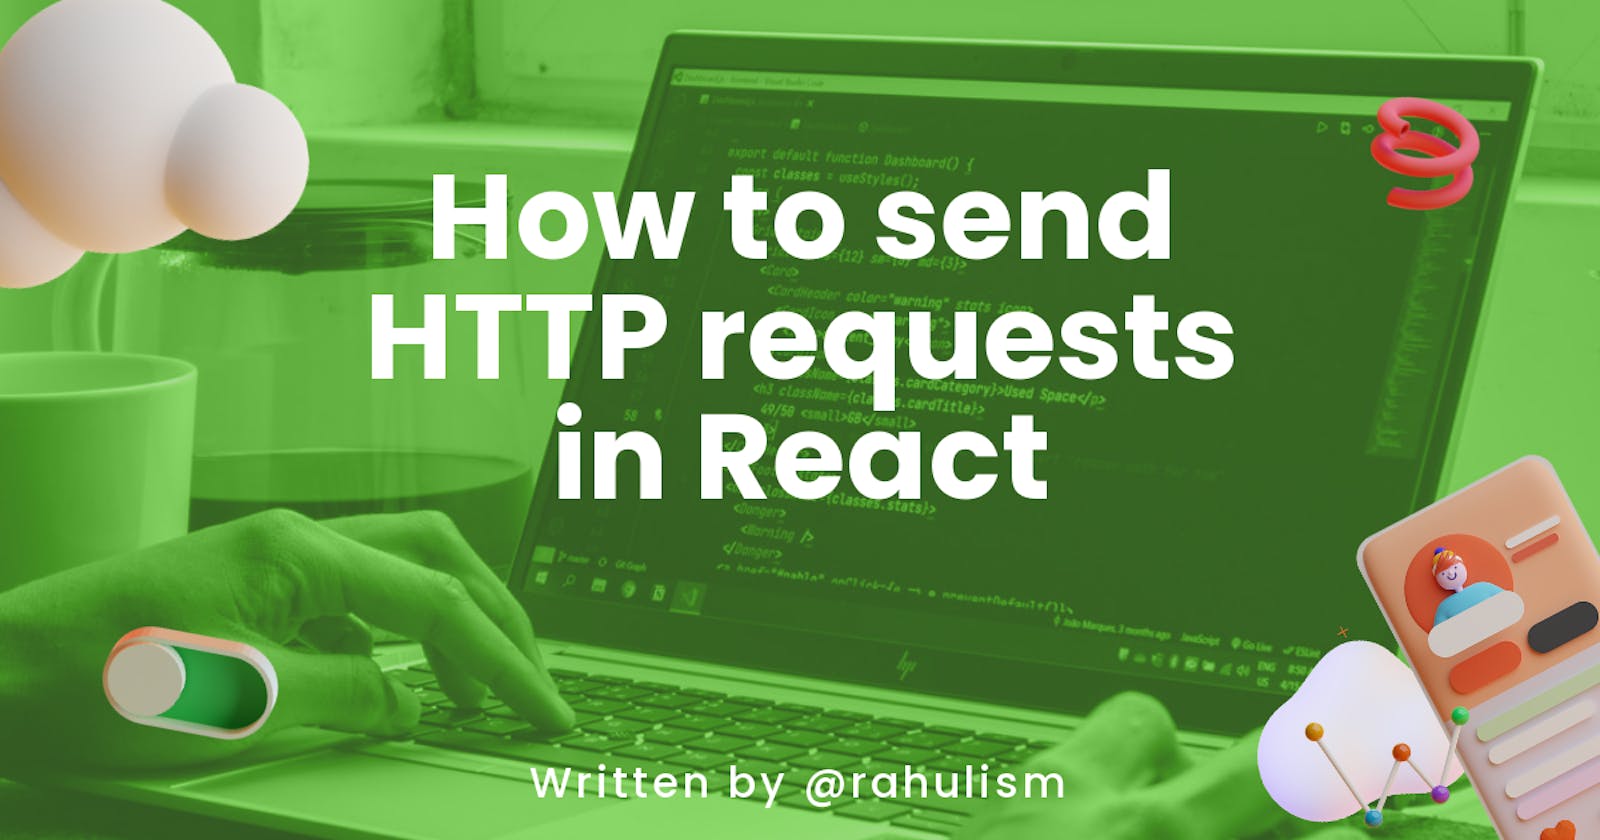 How to send HTTP requests in React